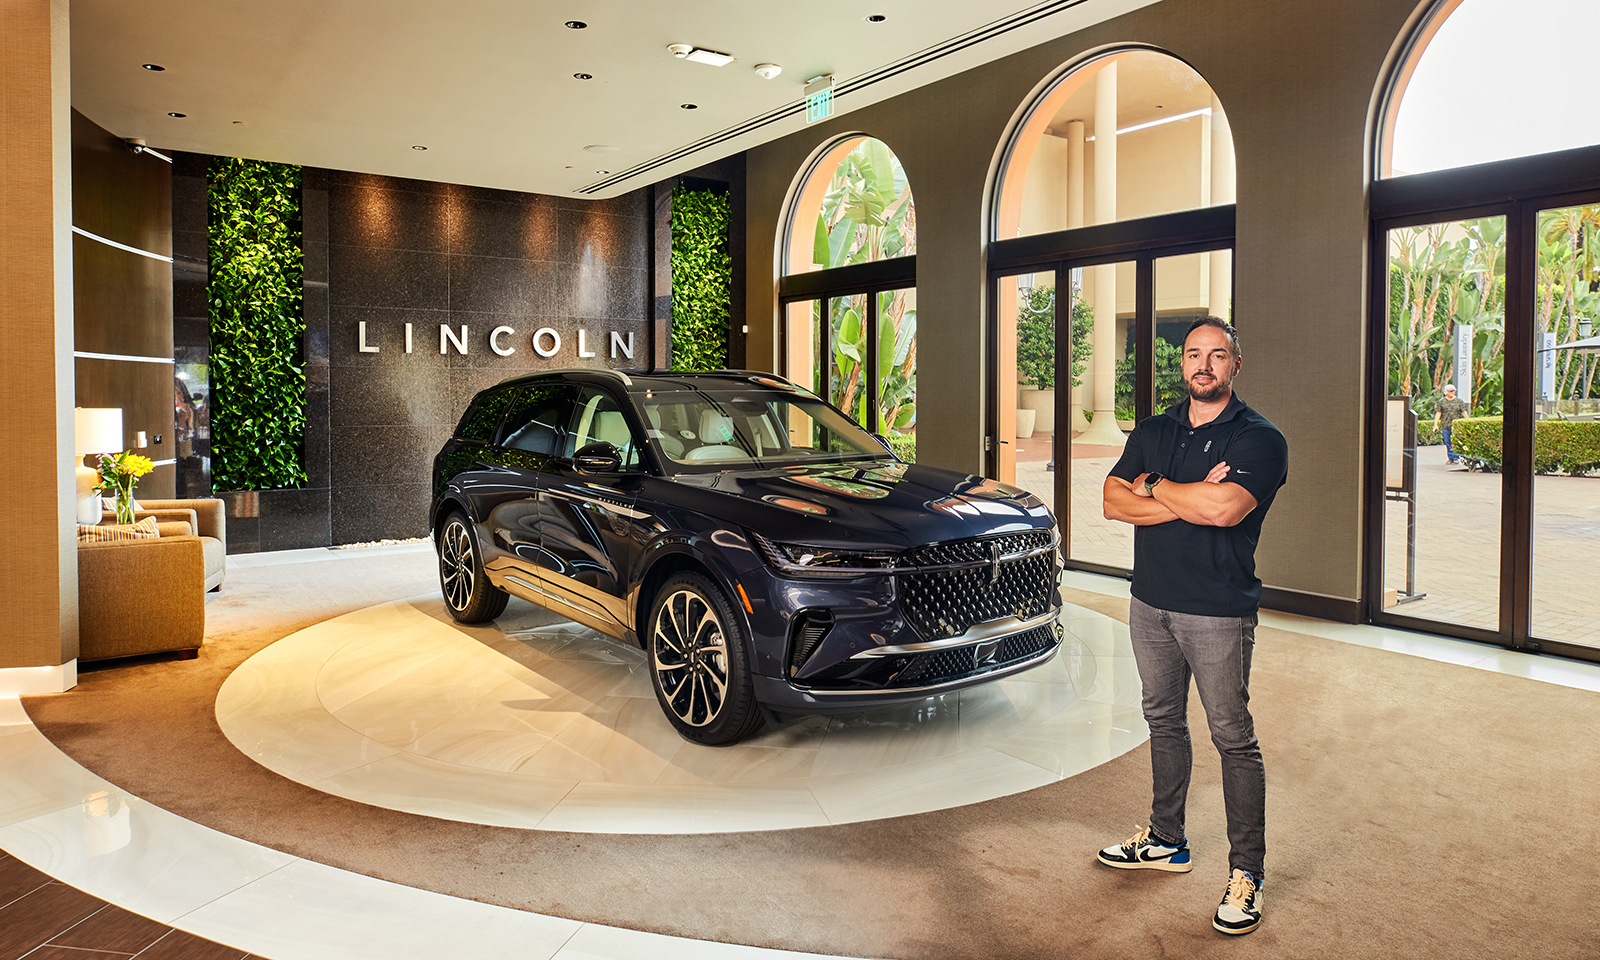 Lincoln’s design director takes it ‘next level’